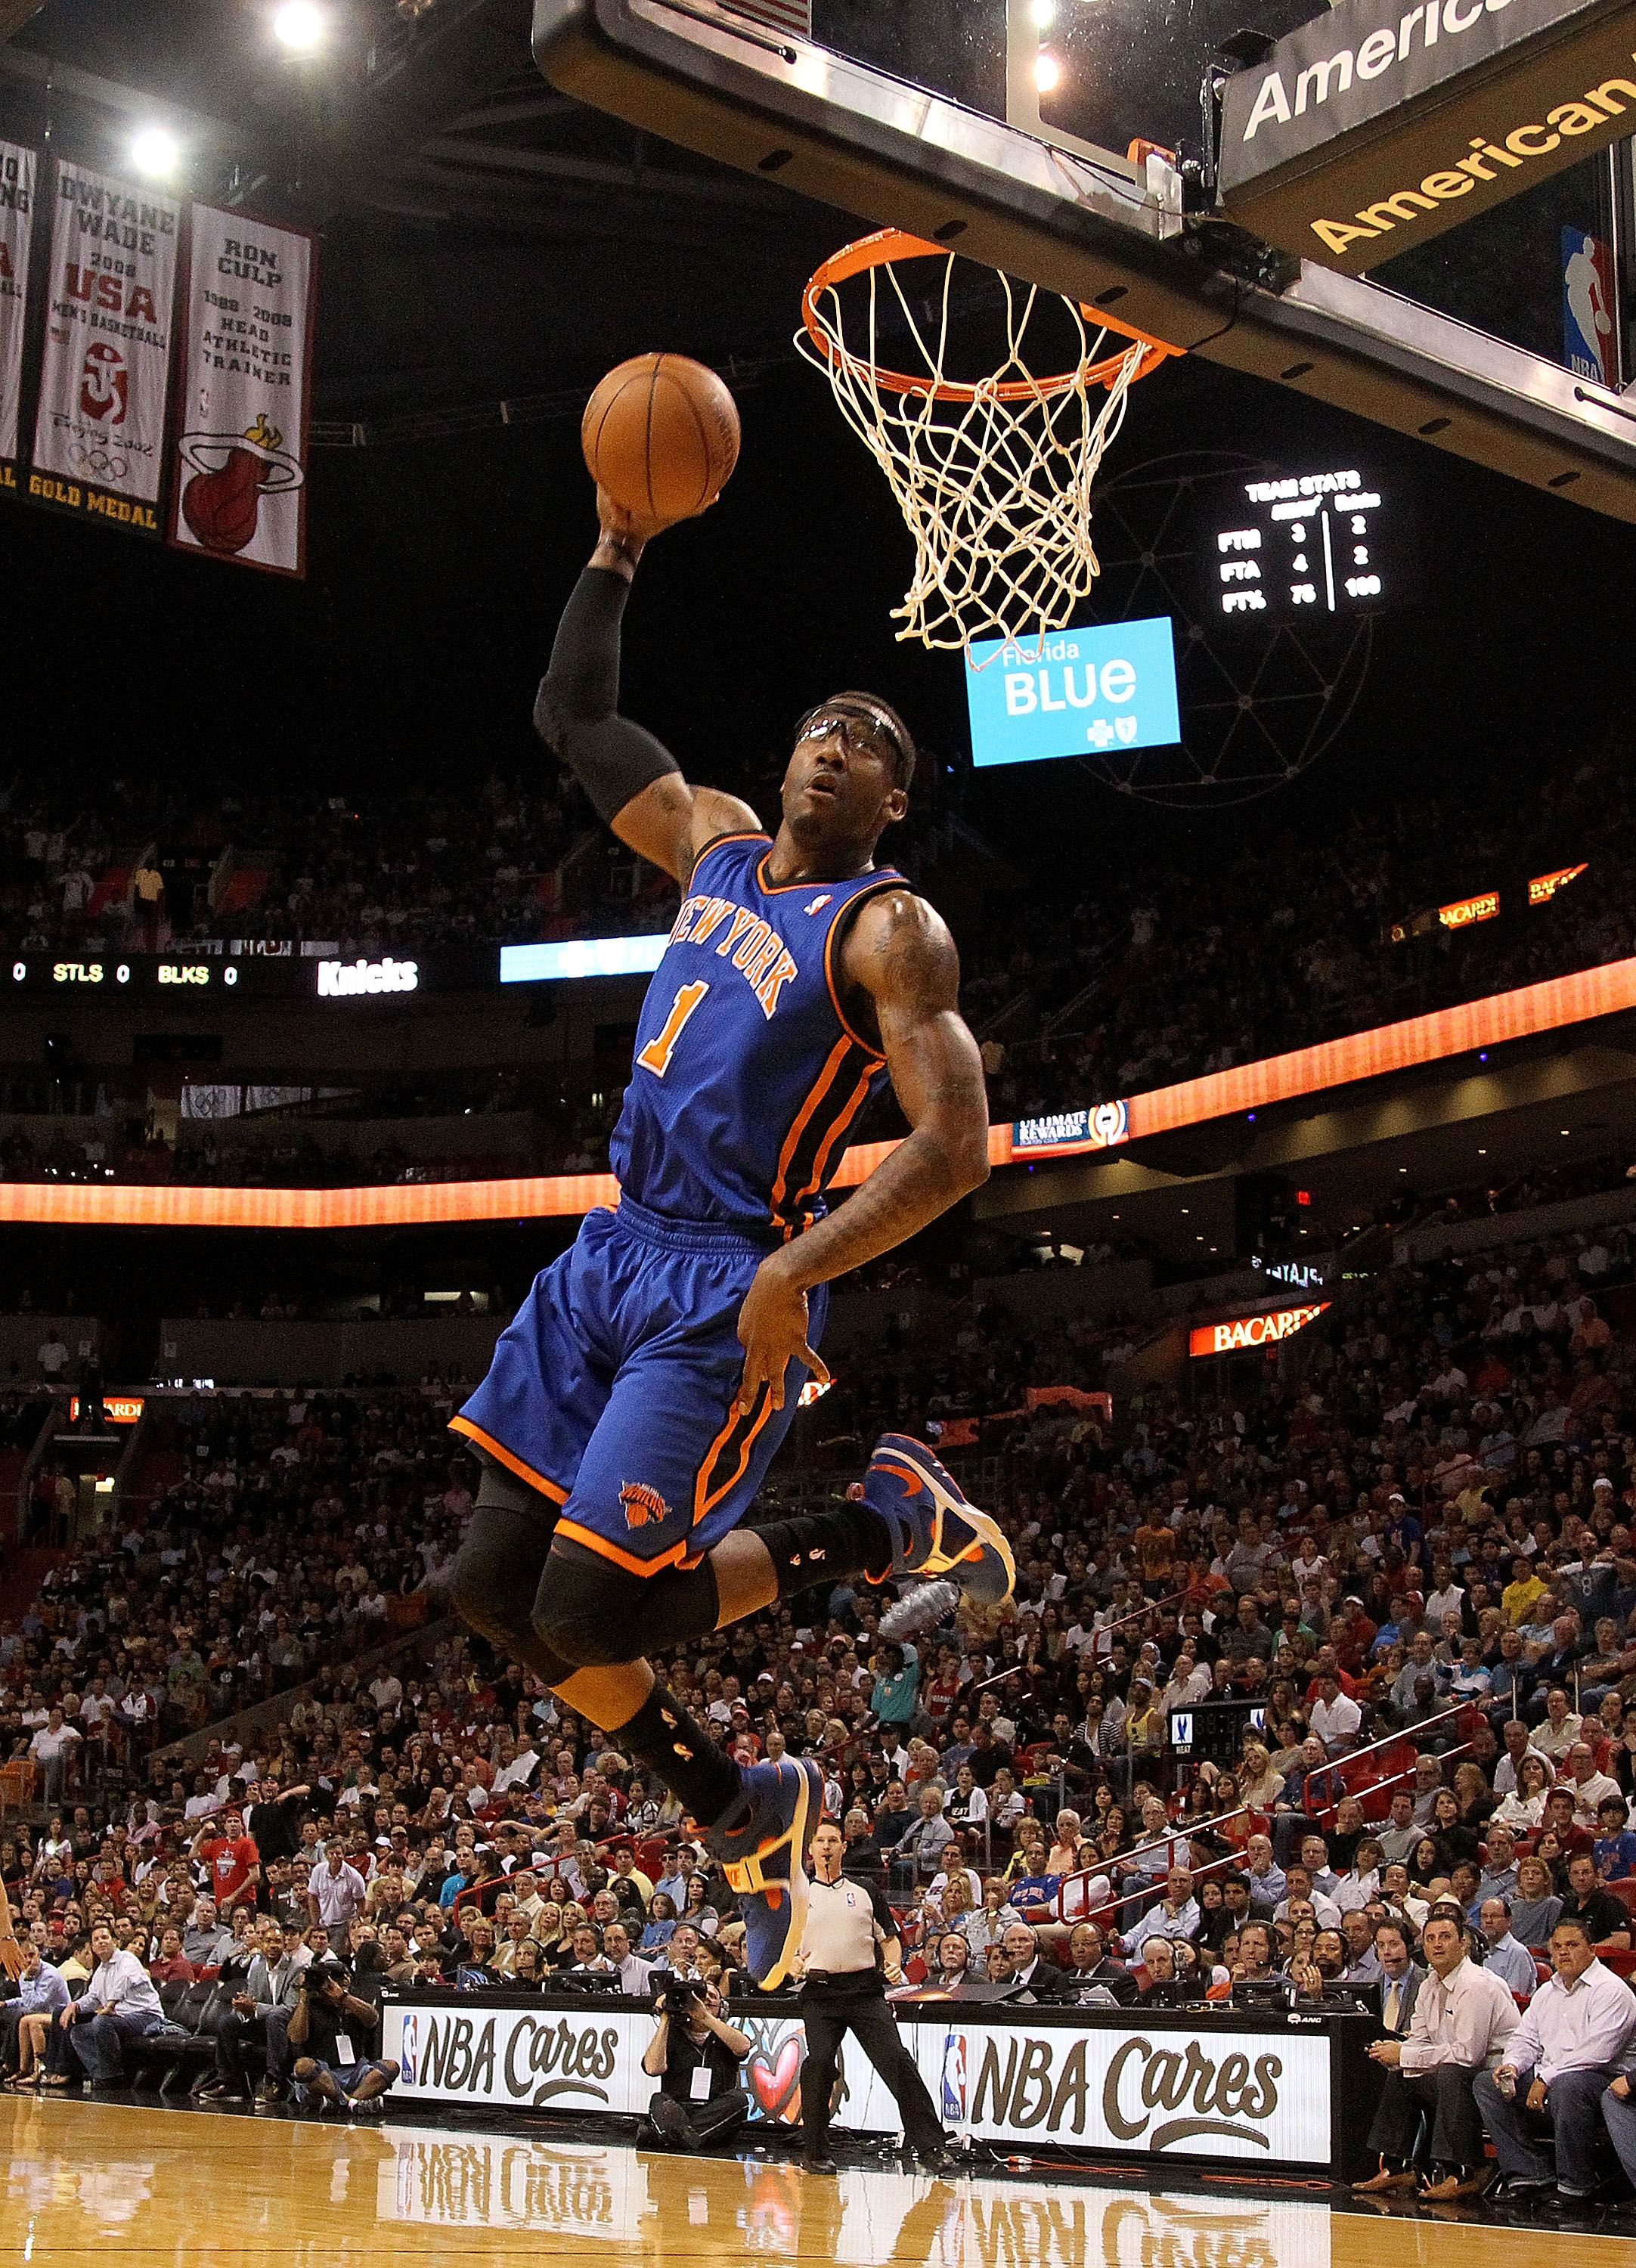 MIAMI, FL - FEBRUARY 27:  Amar'e Stoudemire #1 of the New York Knicks dunks during a game against the the Miami Heat at American Airlines Arena on February 27, 2011 in Miami, Florida. NOTE TO USER: User expressly acknowledges and agrees that, by downloadi